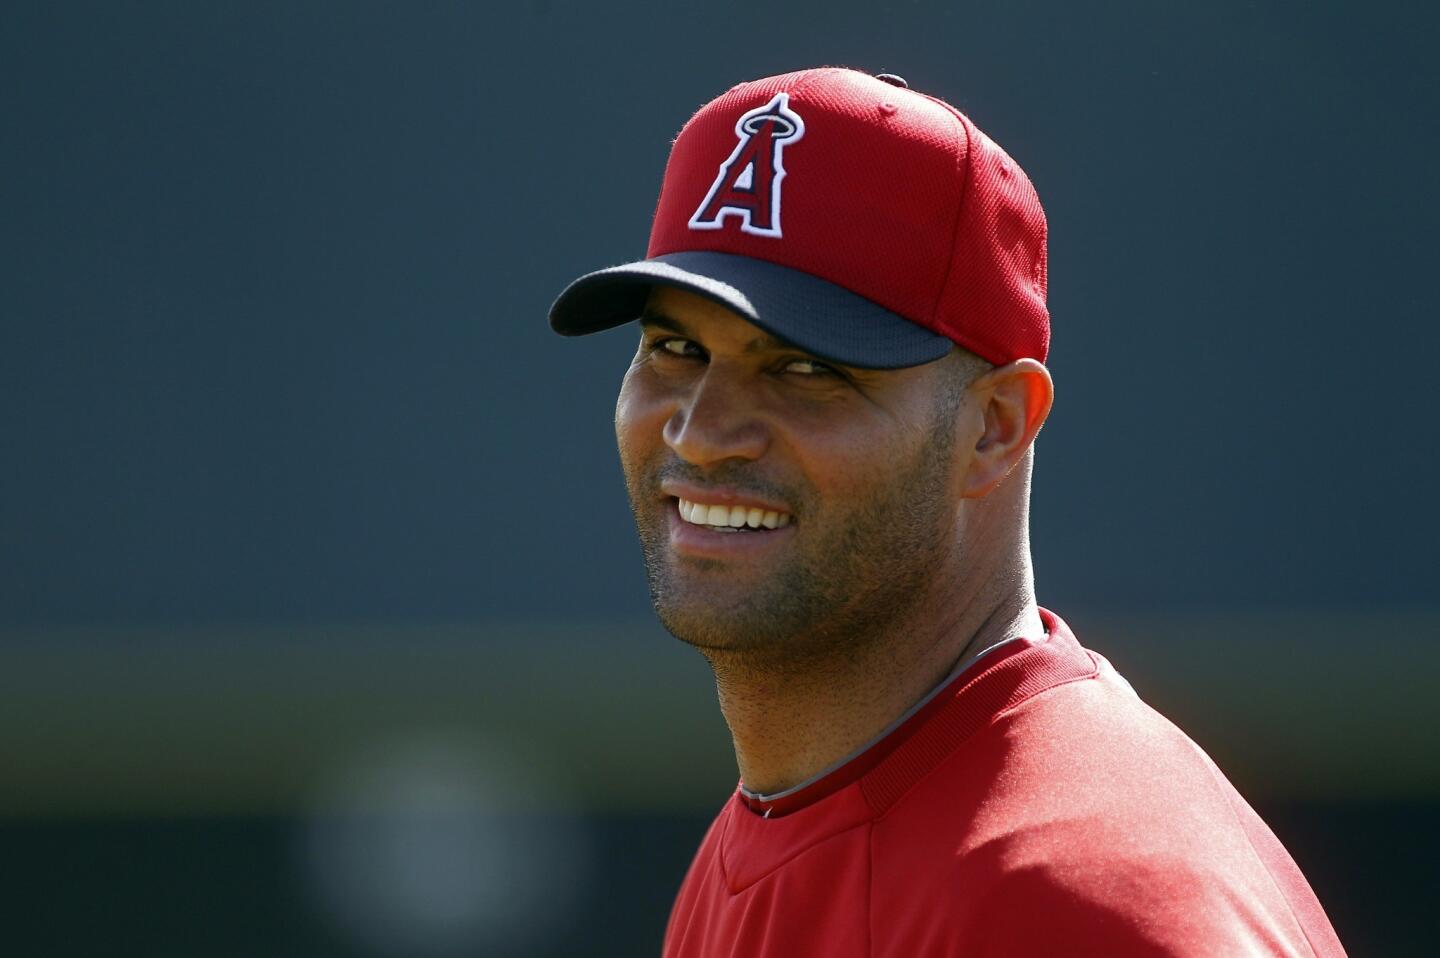 Angels first baseman, DH / Estimated 2013: $19 million / National ranking: No. 46